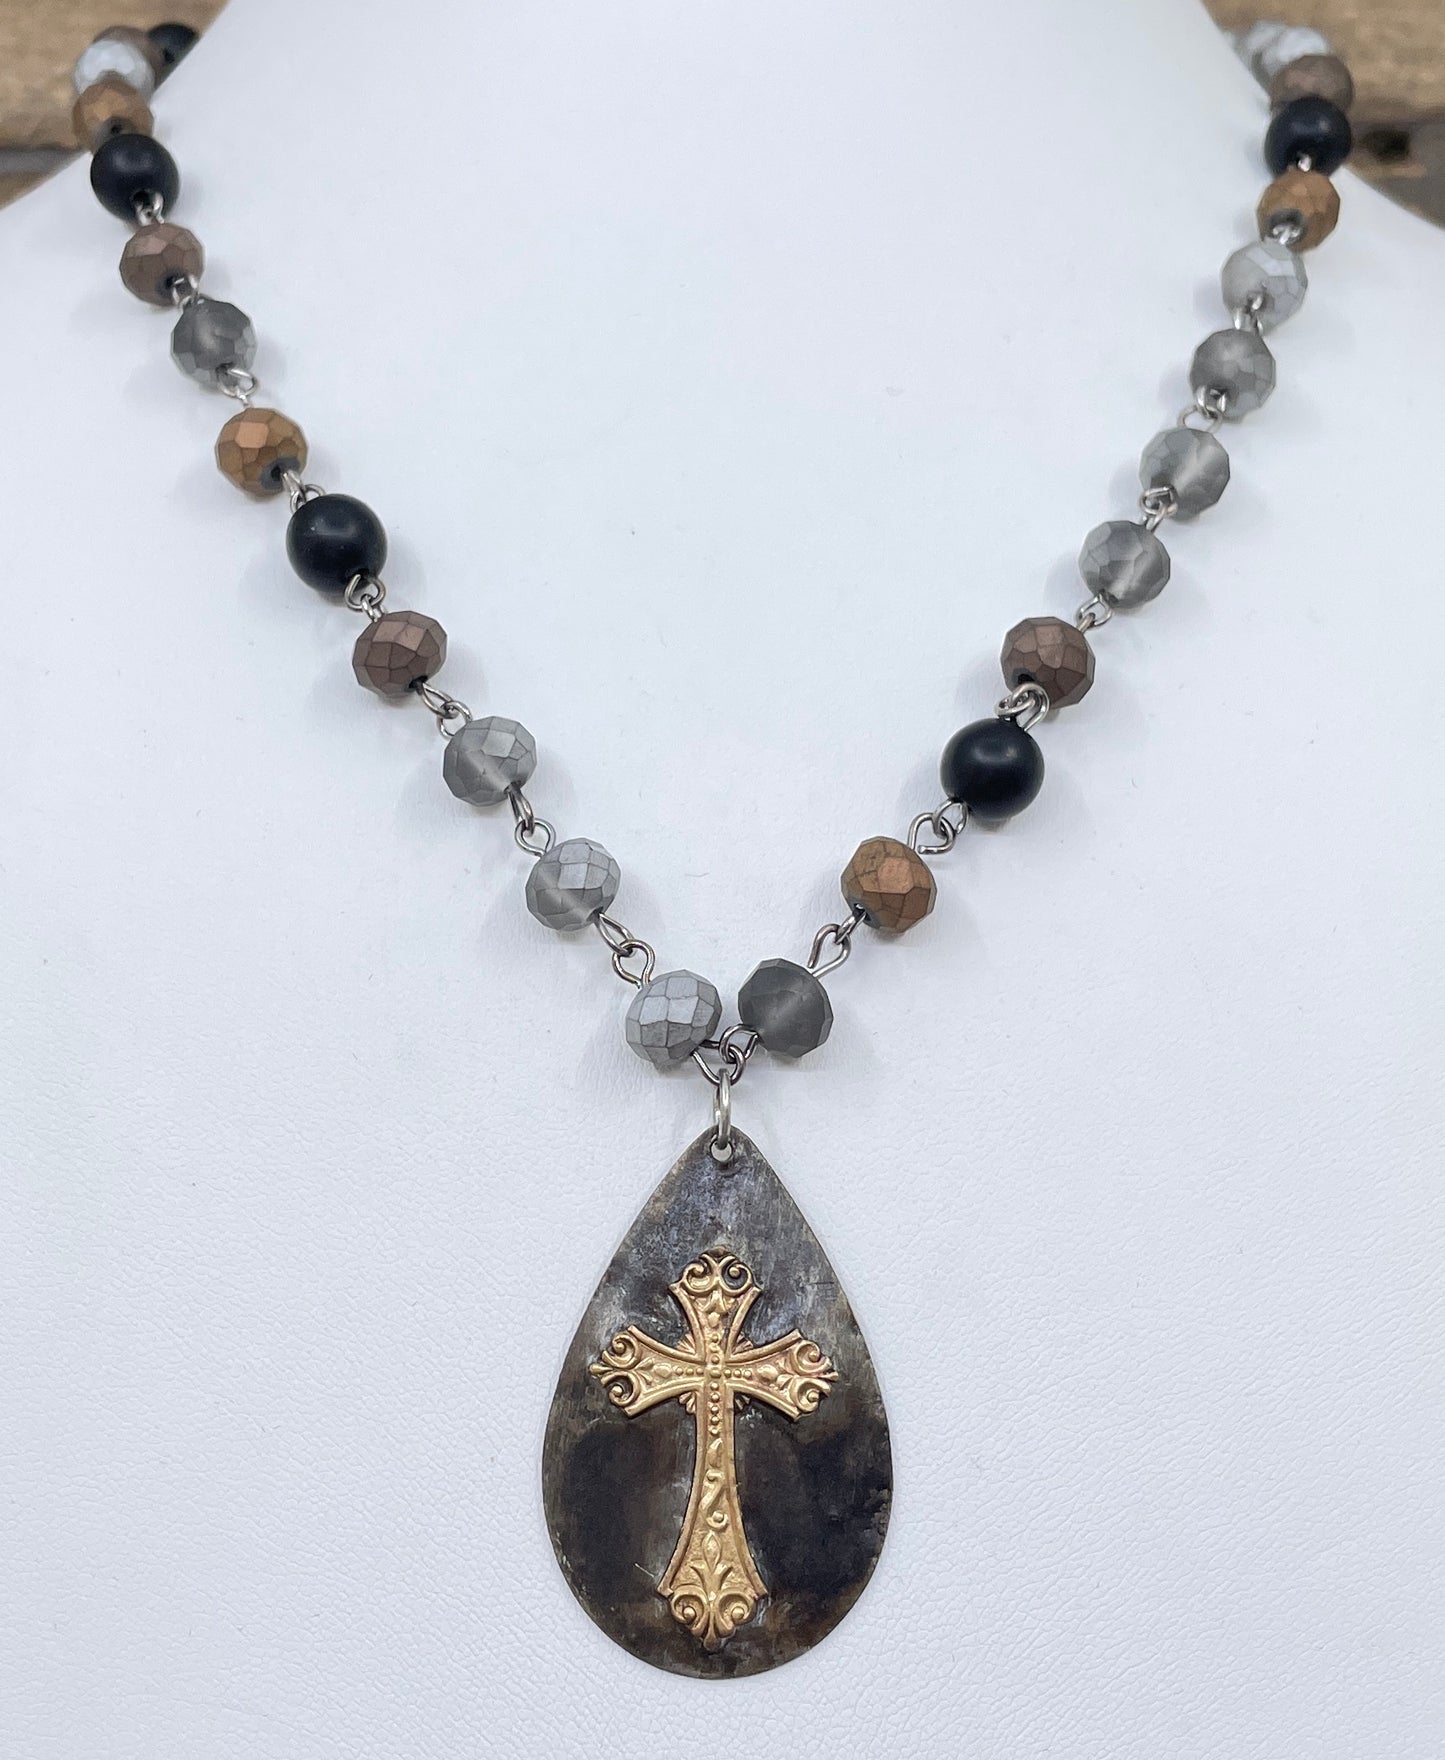 Vintage Soldered Cross Pendant Rosary Necklace